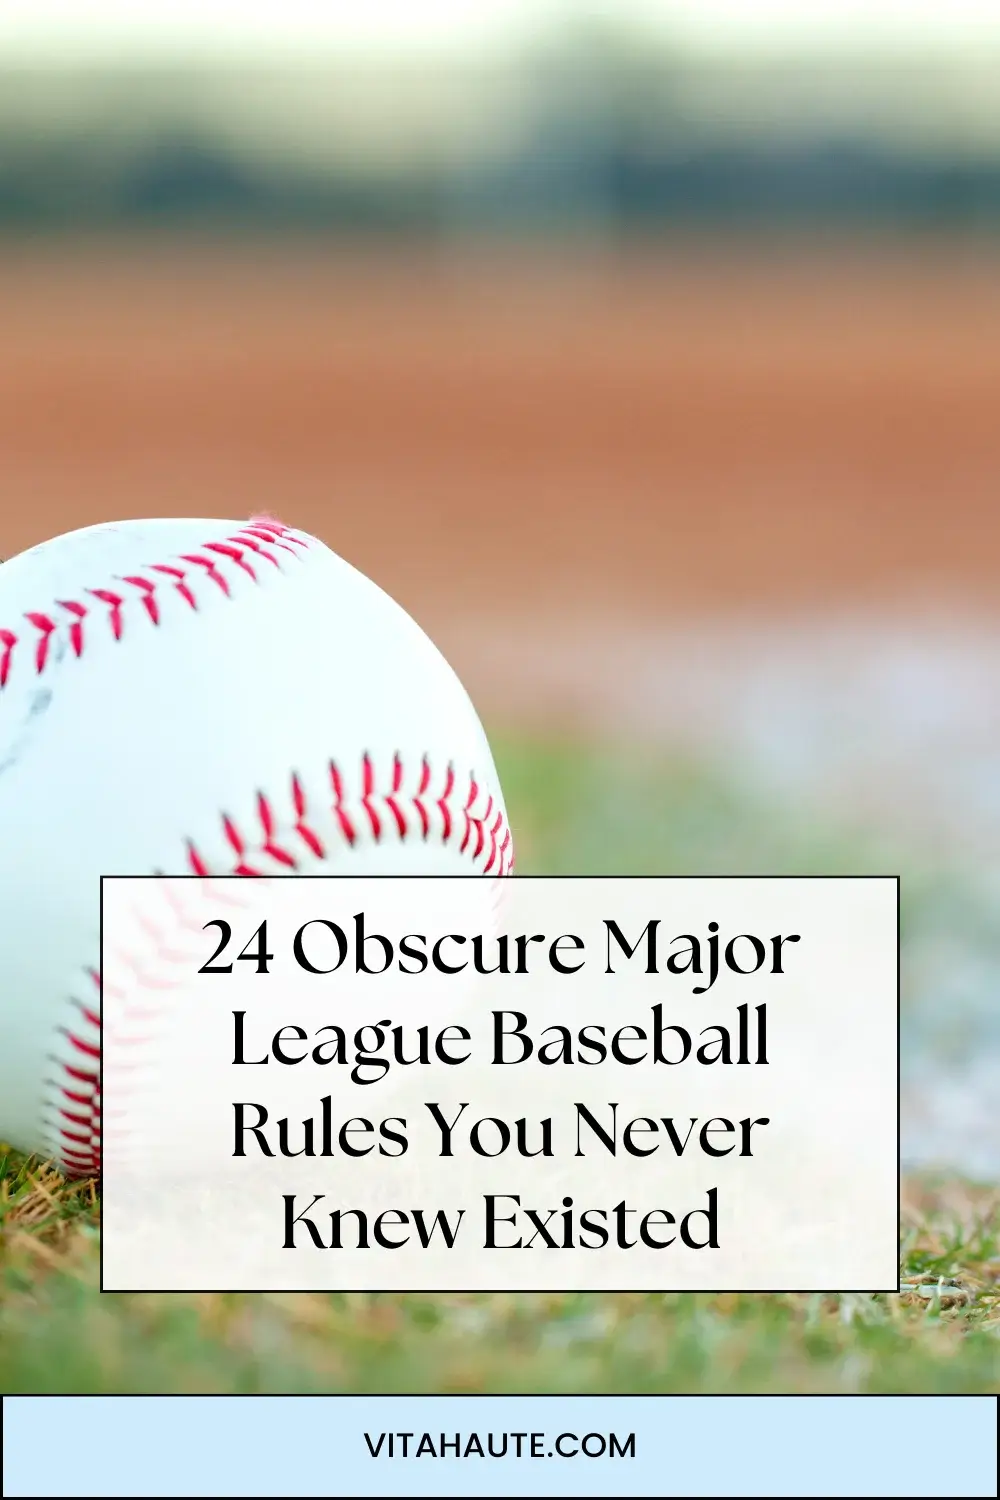 A list of some obscure Major League Baseball rules